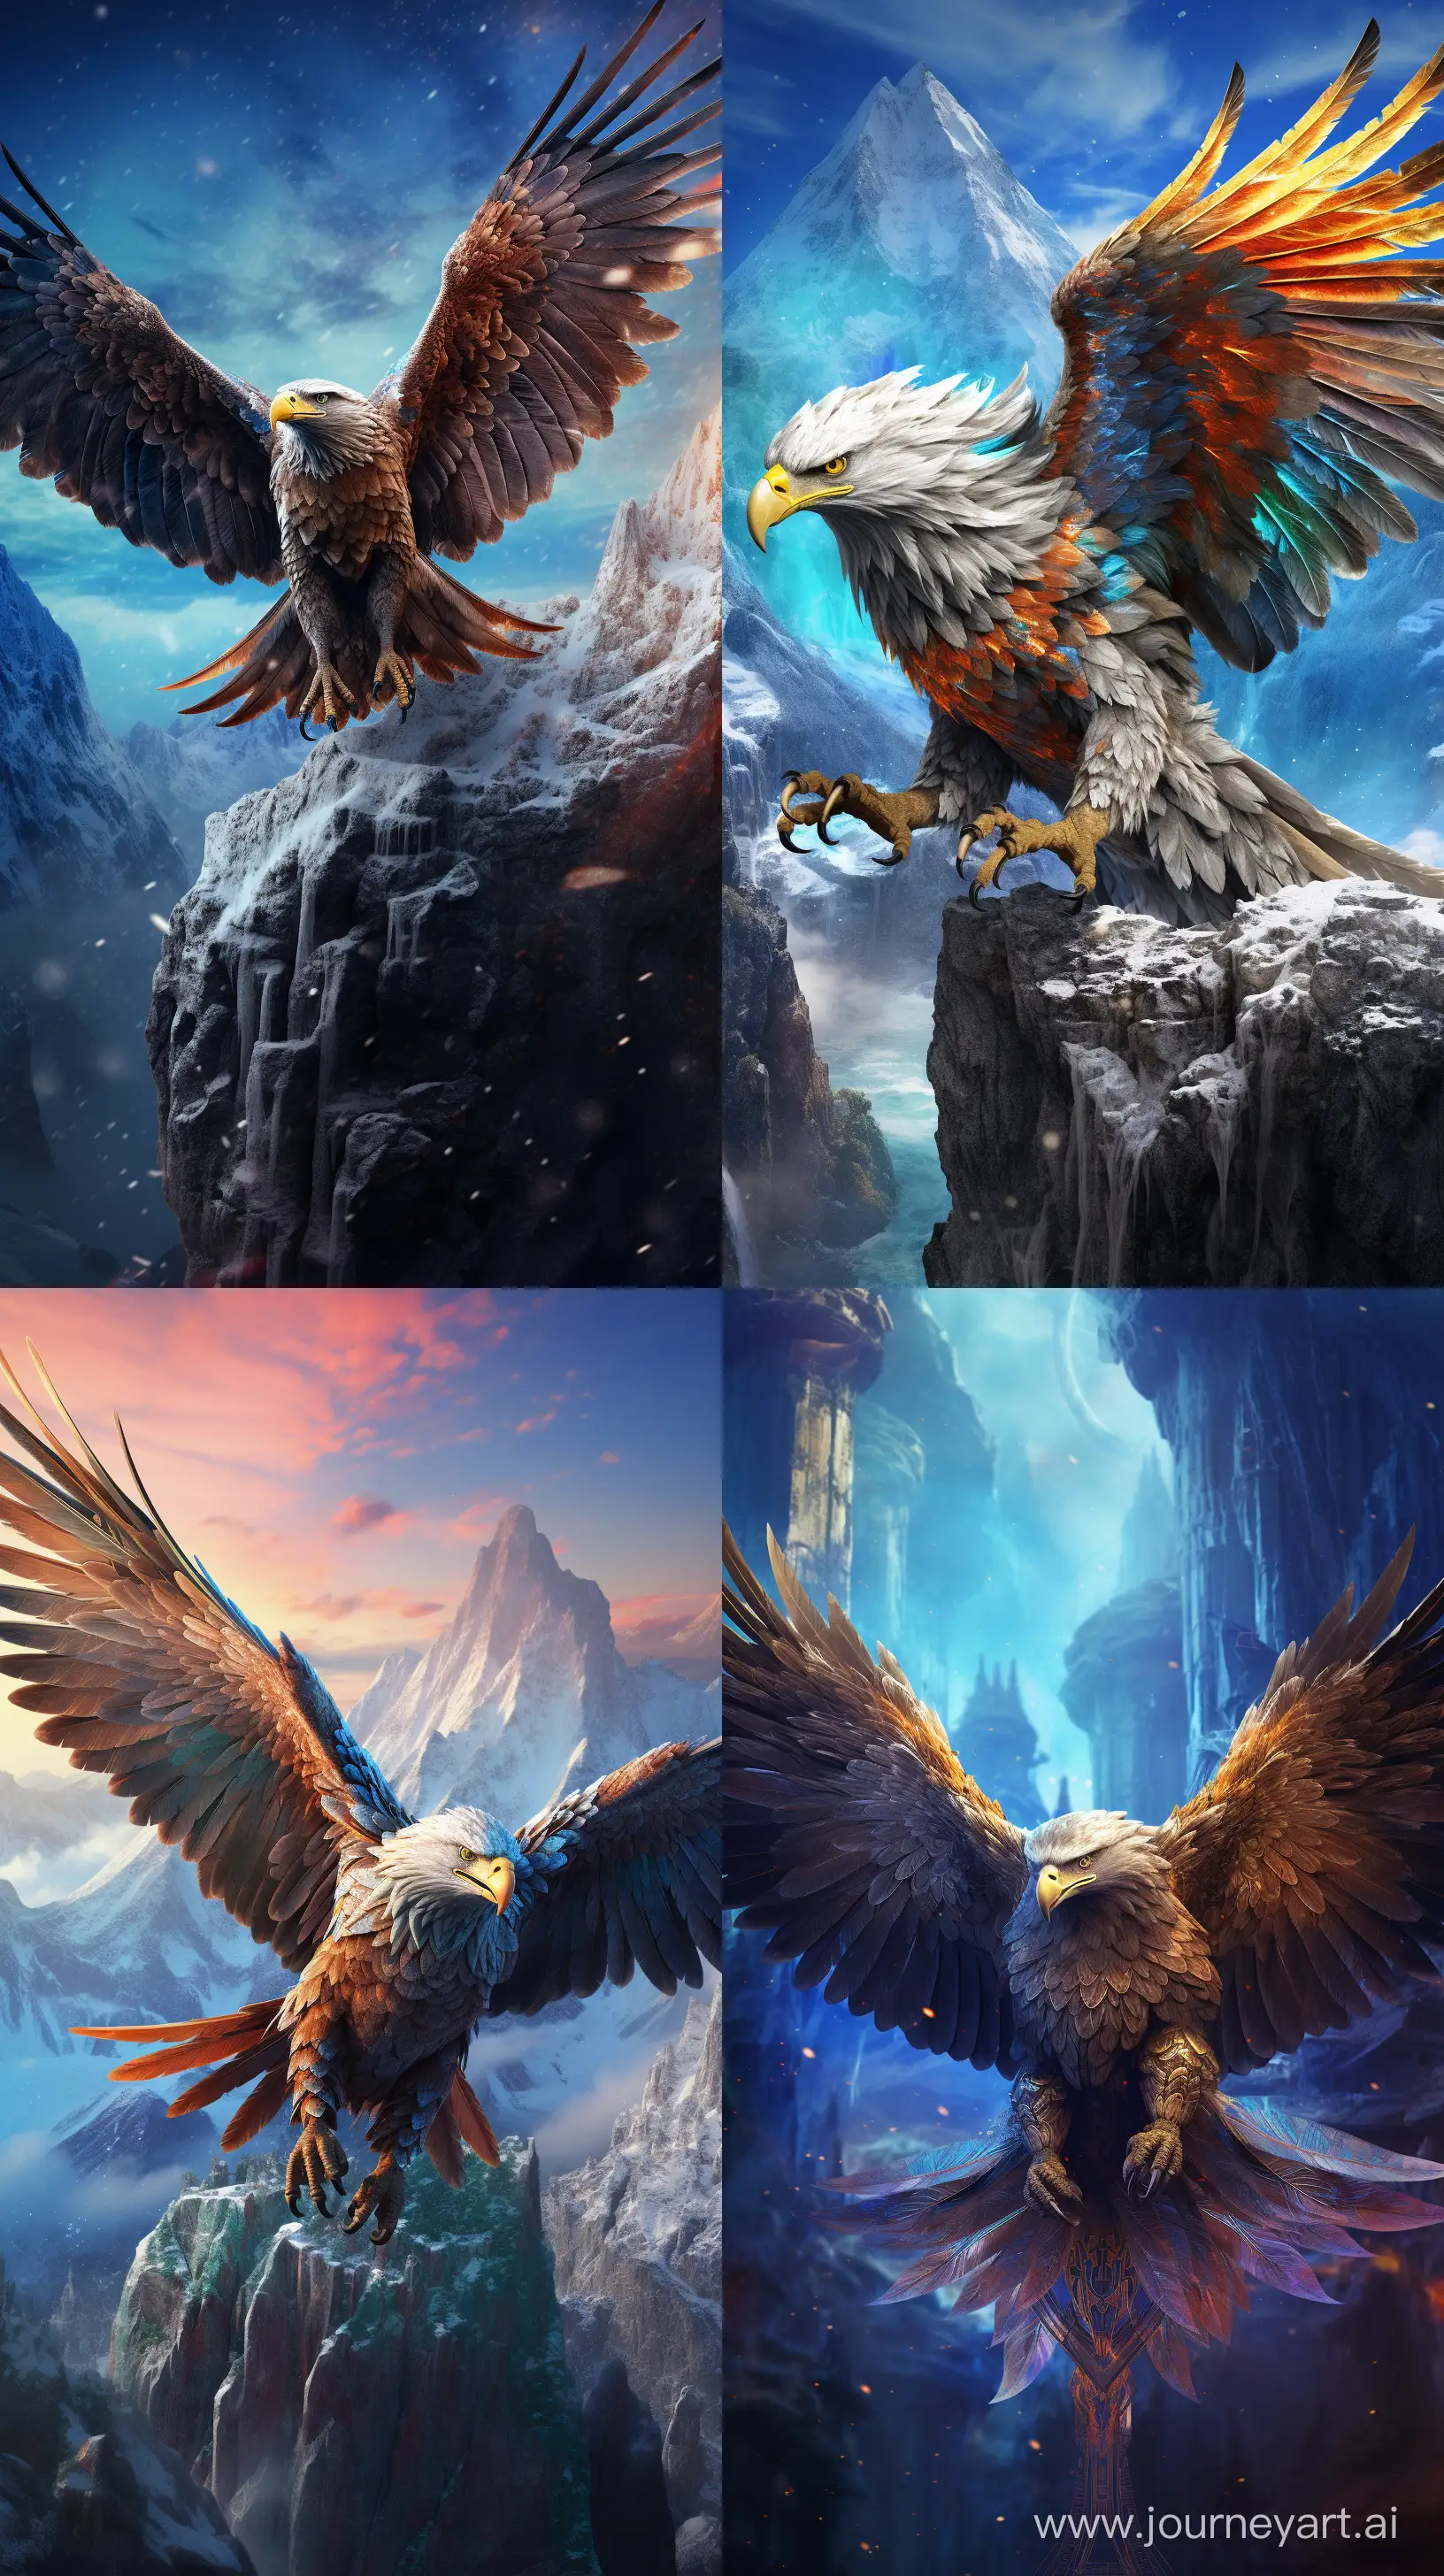 Colorful images of an eagle with one body but 2heads from ancient Hindu mythology, flying high, fierce expression, realistic depiction, close-up, intricate details, high resolution 8k quality celestial background --ar 9:16 